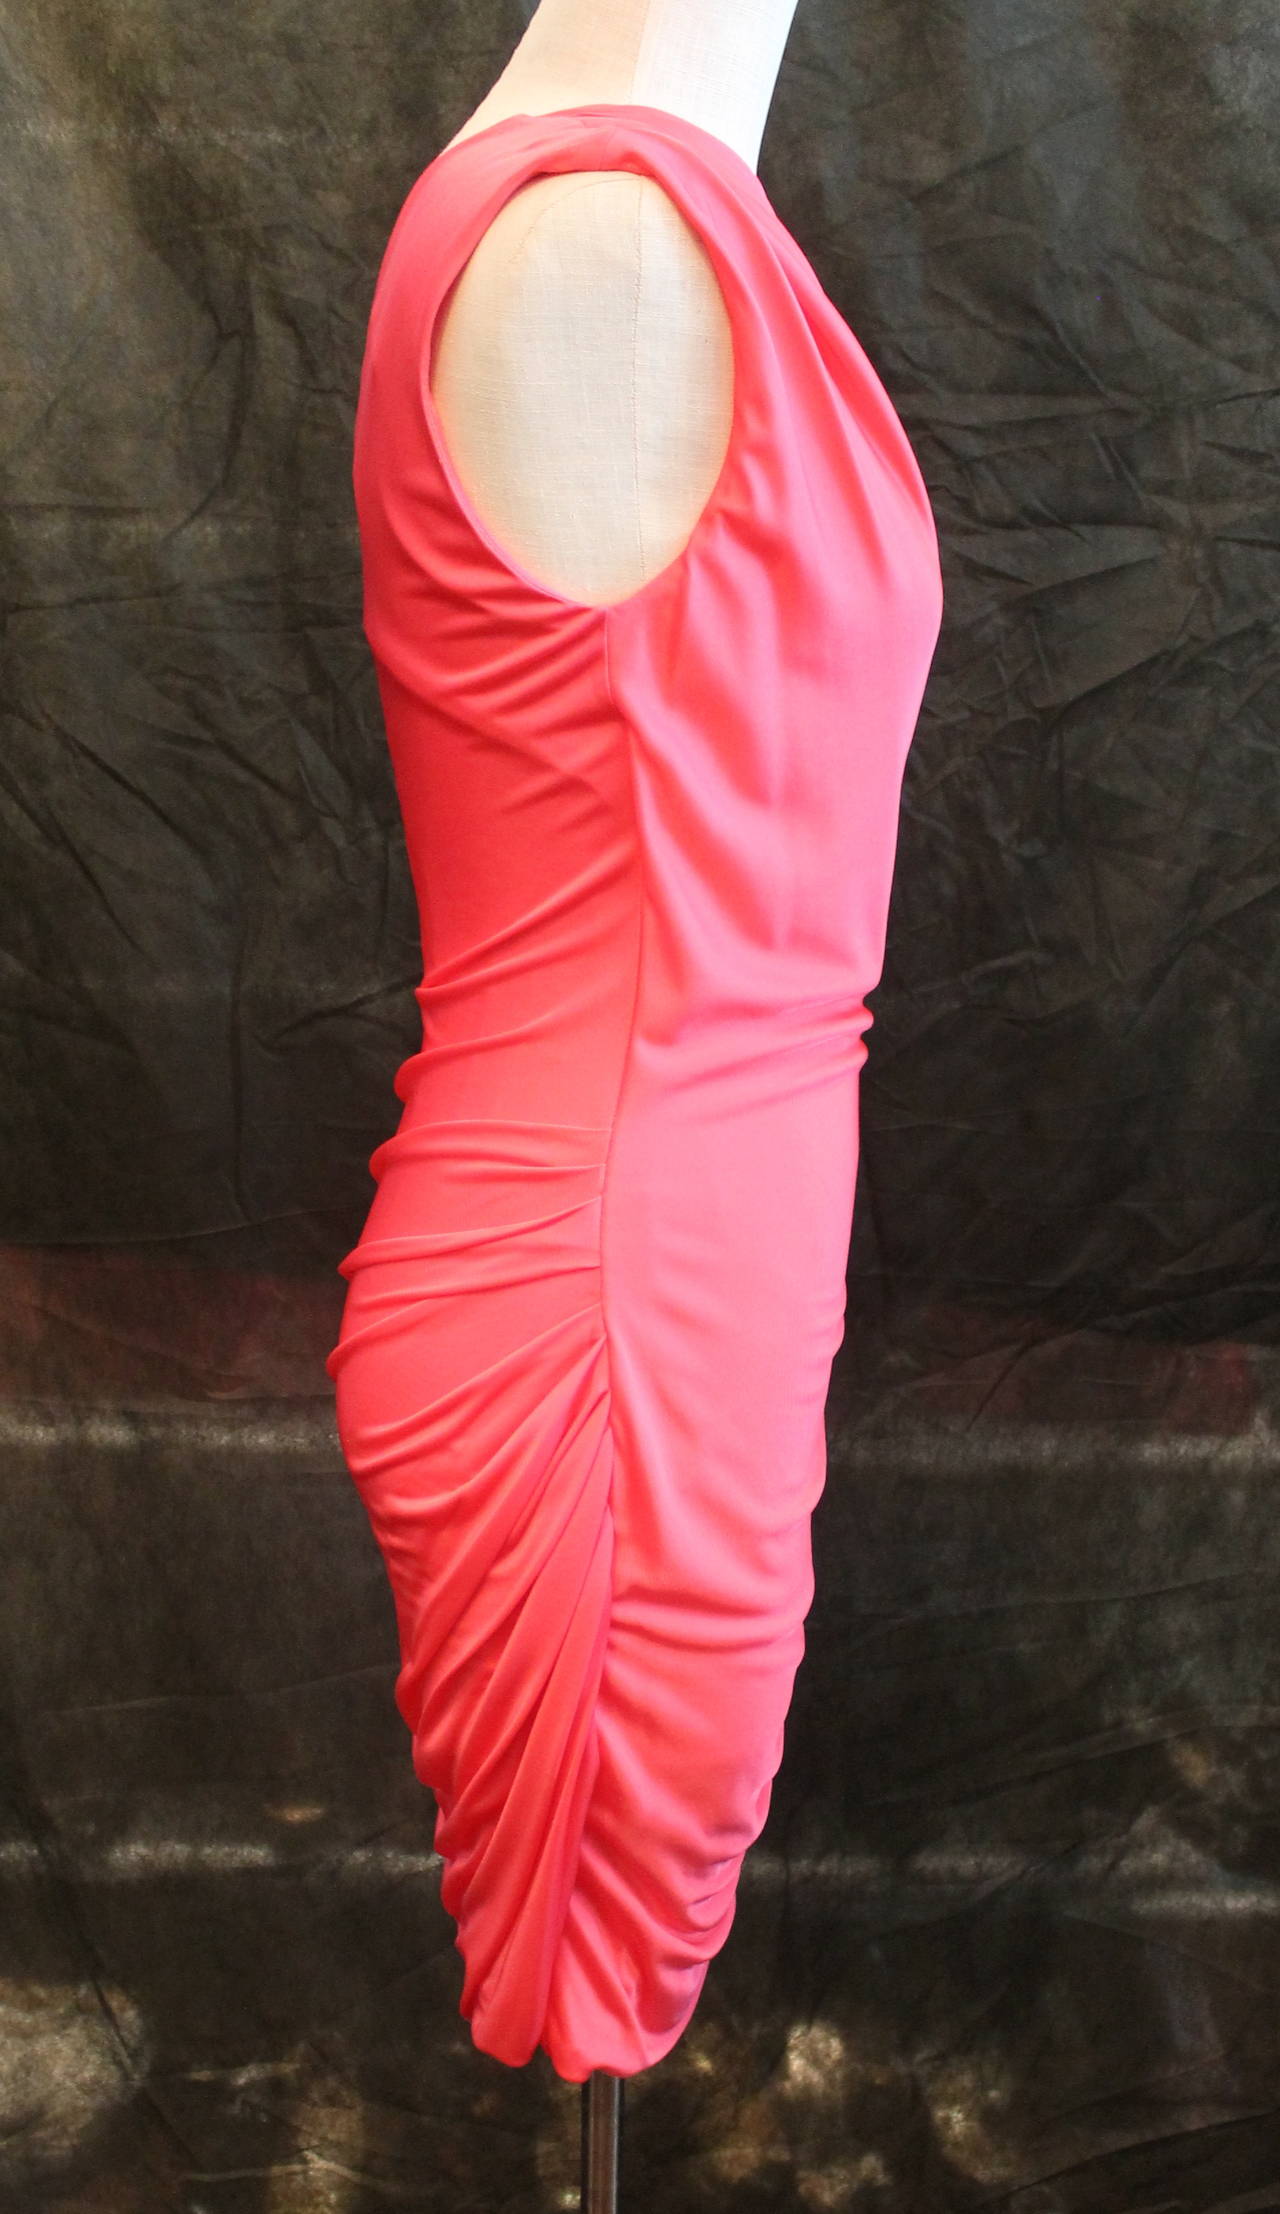 Emilio Pucci Pink One-Shoulder Silk Jersey Dress. This dress is a size 8 but stretches a bit. It is in very good condition.

Measurements
Bust- 30"
Waist- 28"
Length- 39"